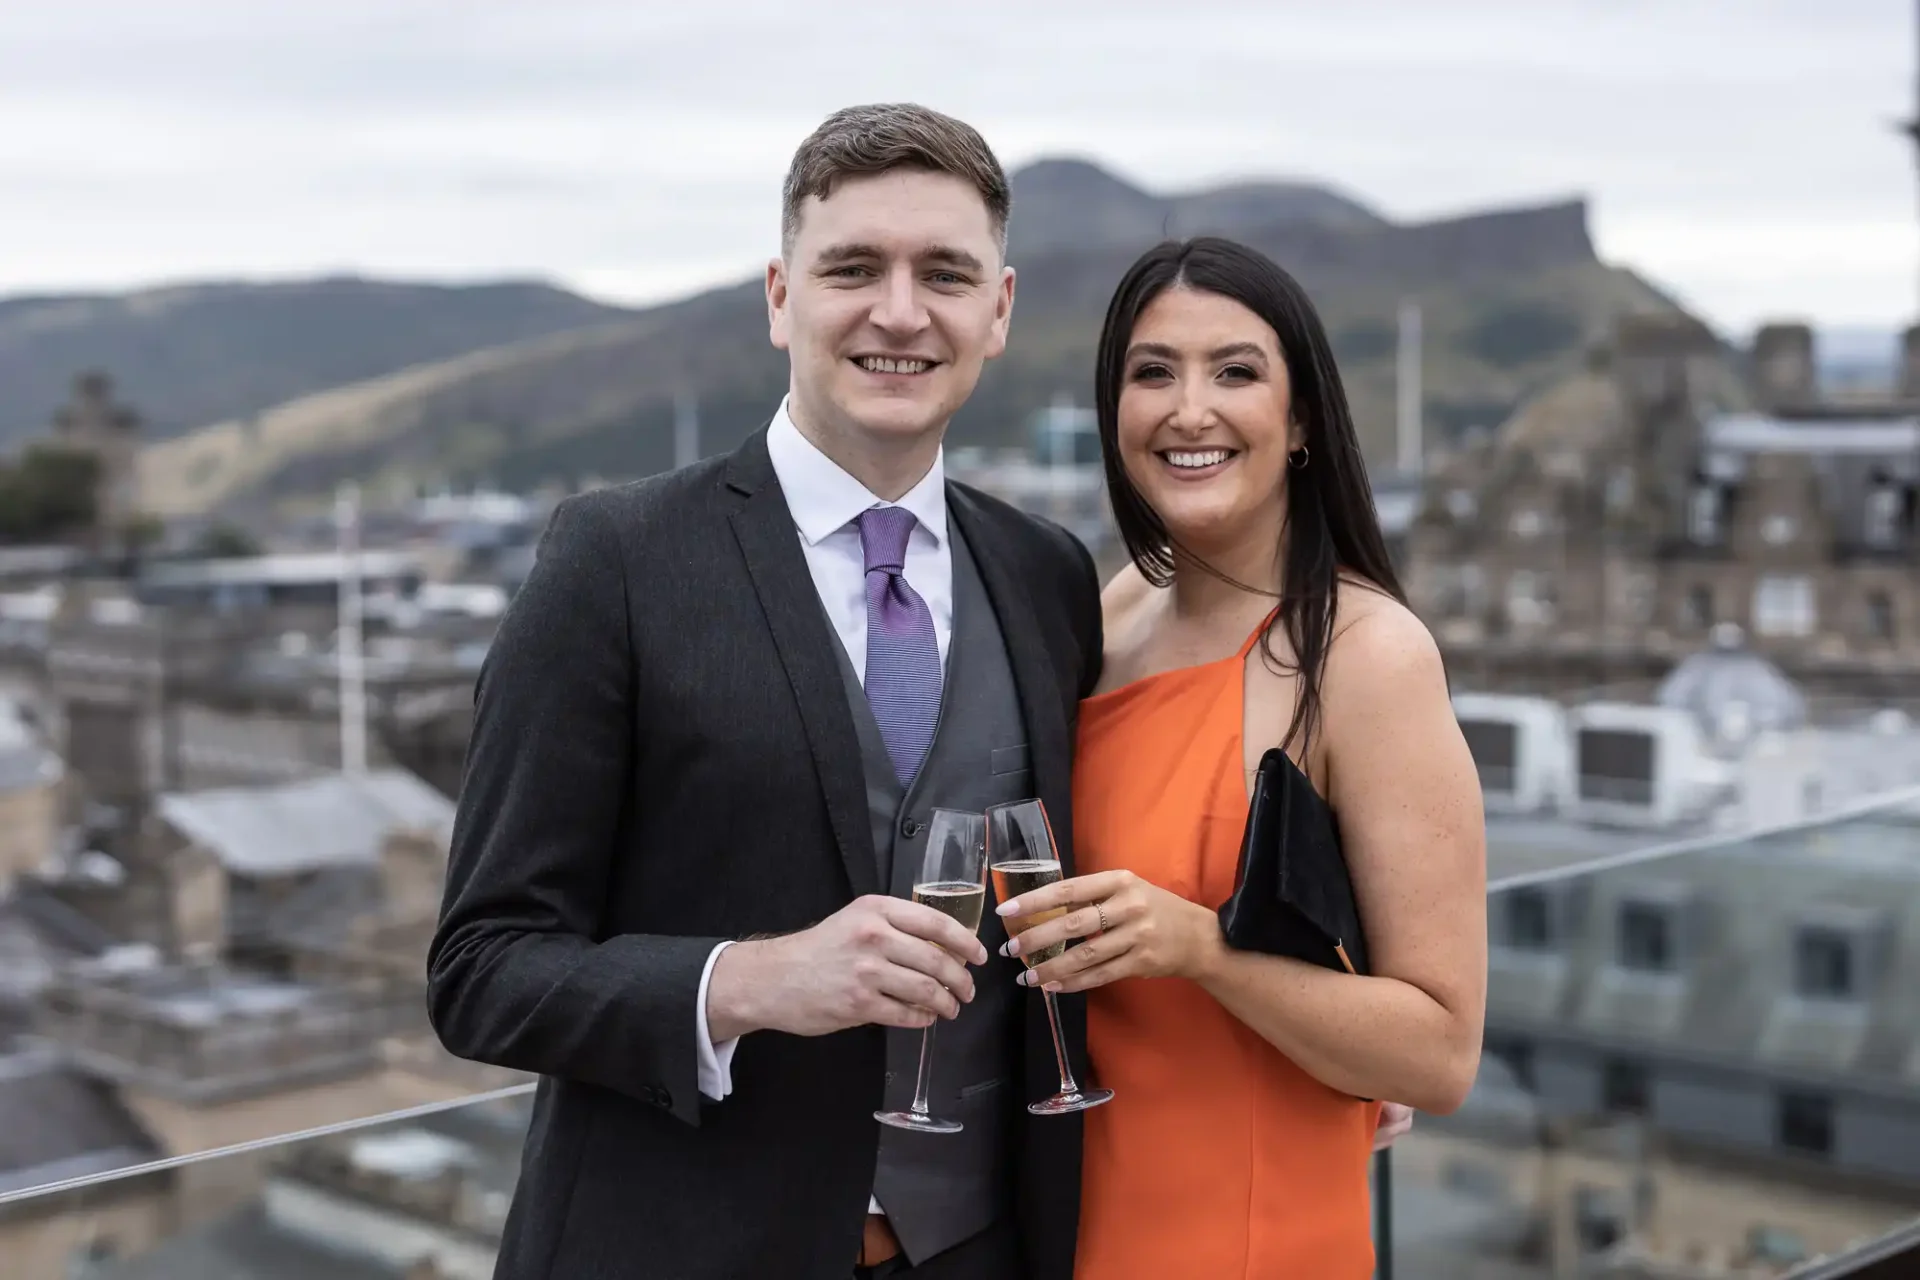 A man and a woman smiling, holding champagne glasses on a rooftop with a cityscape and hills in the background.